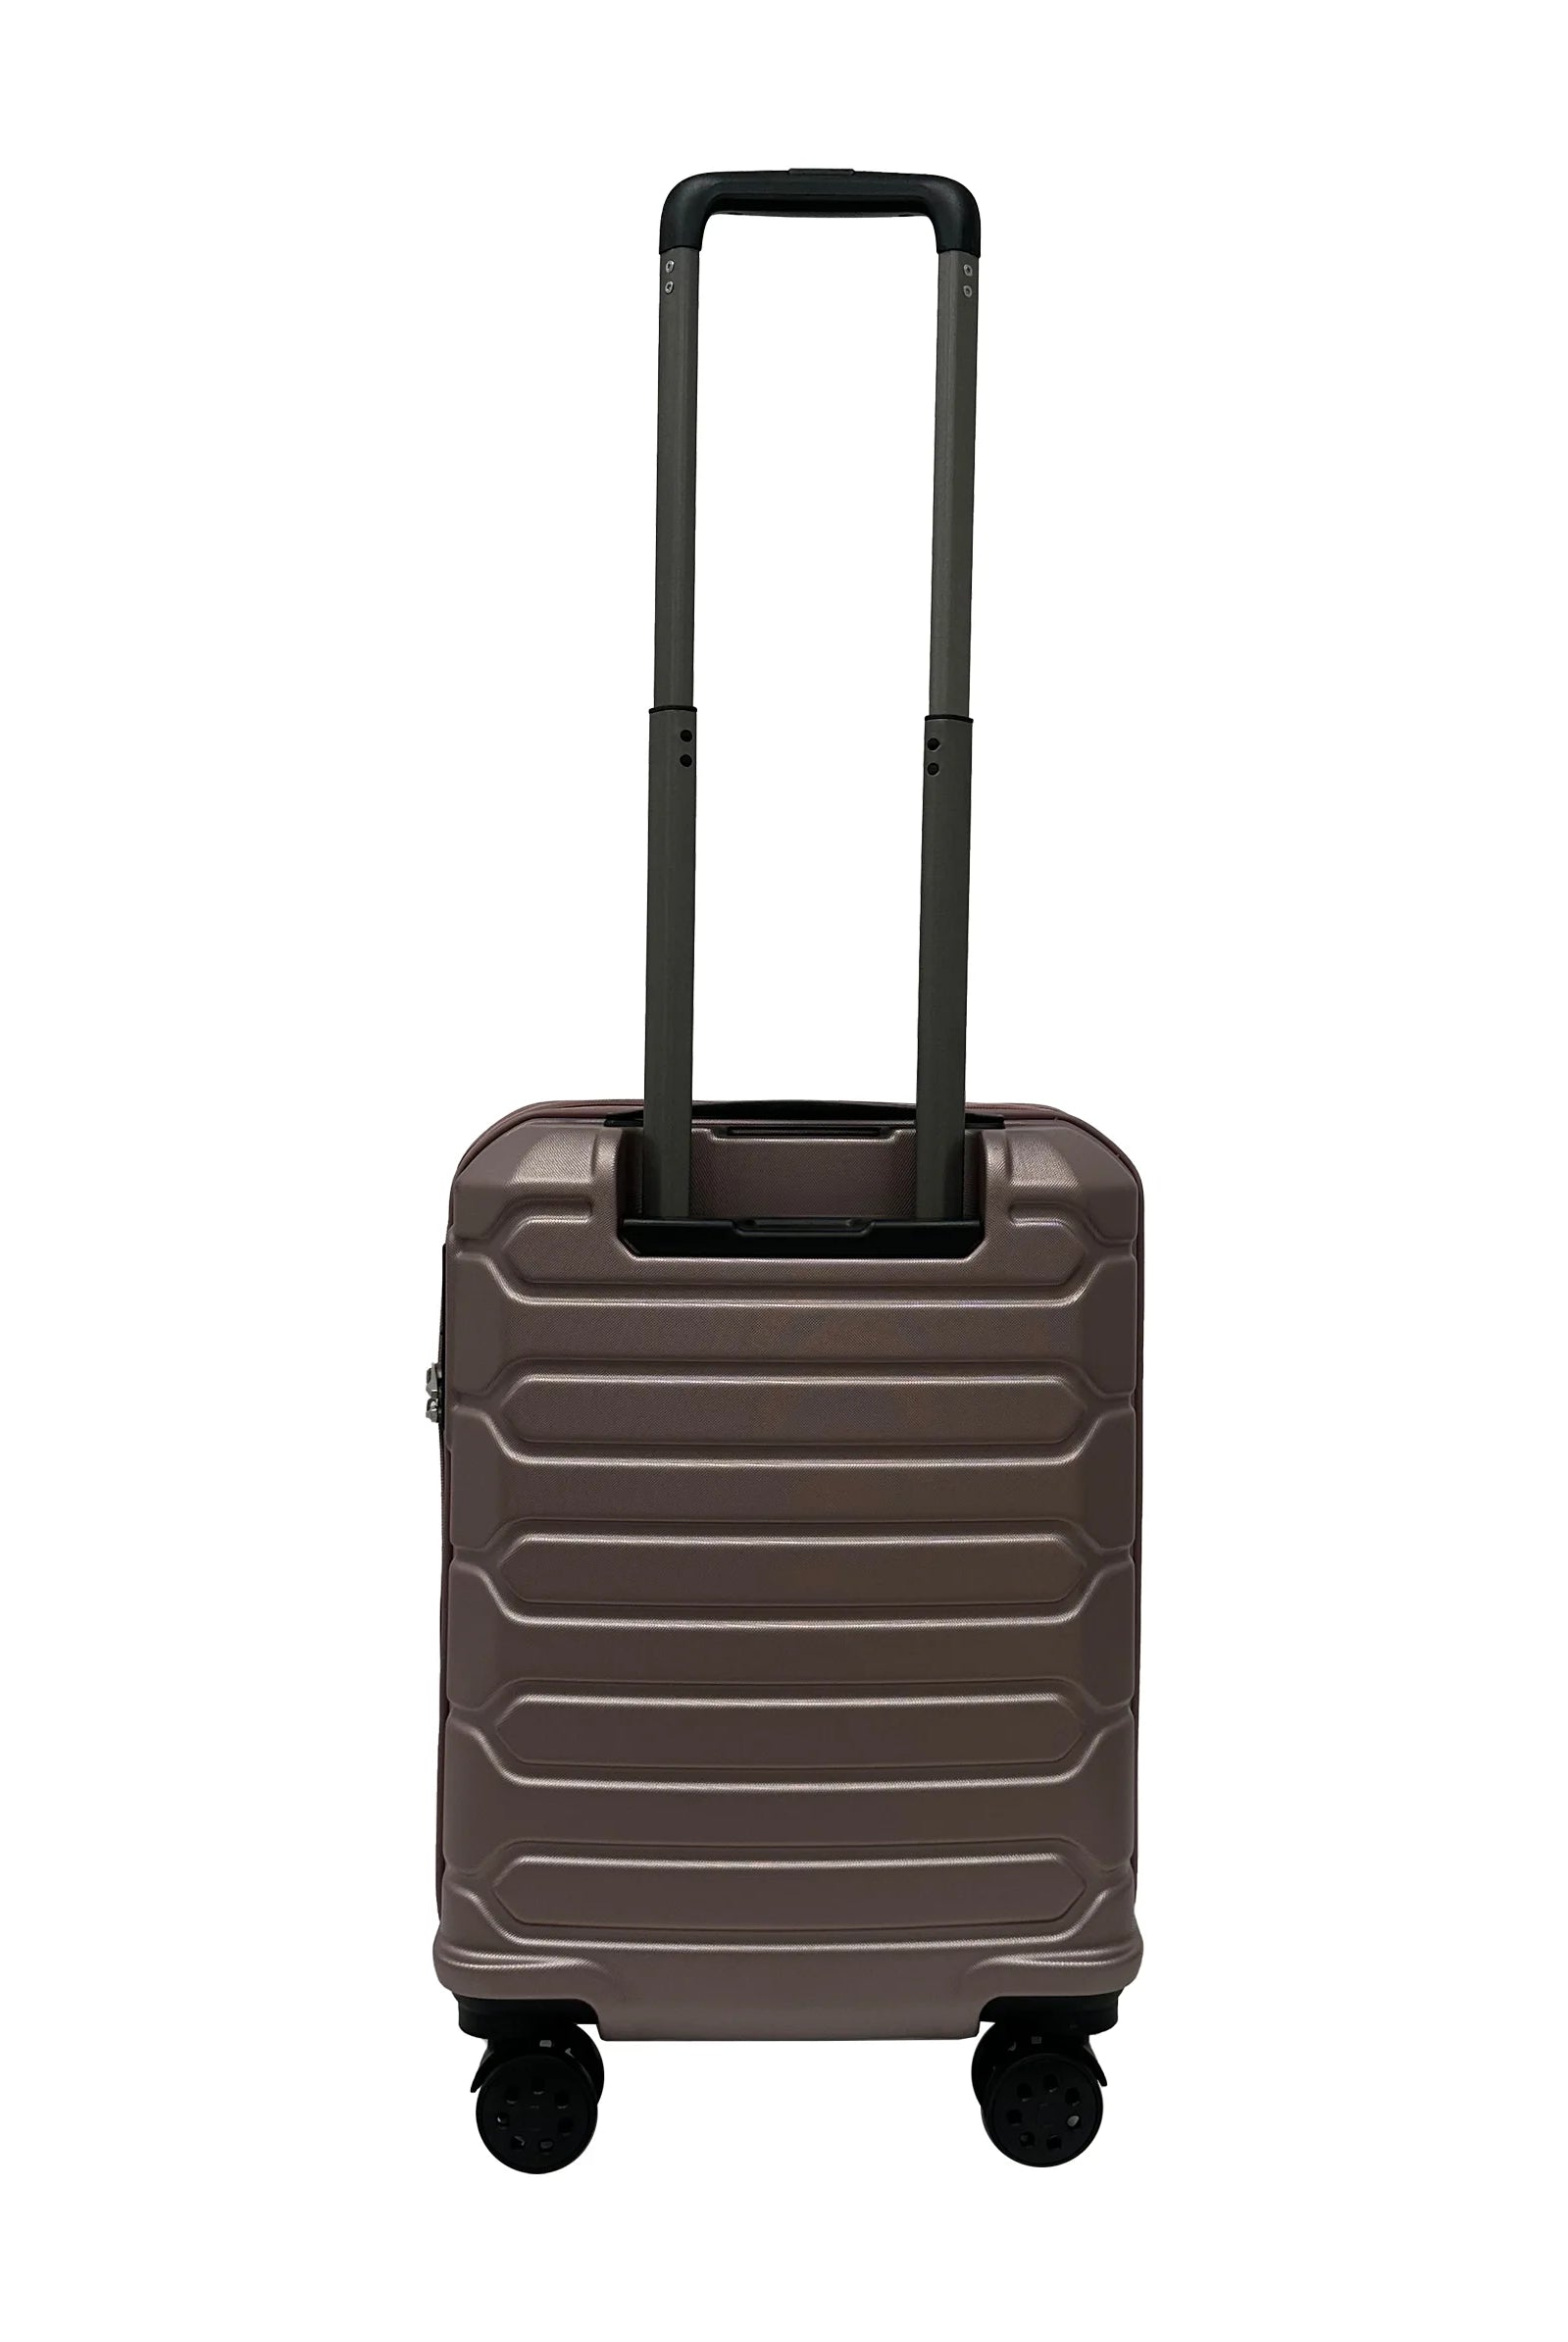 Small cabin suitcase on wheels